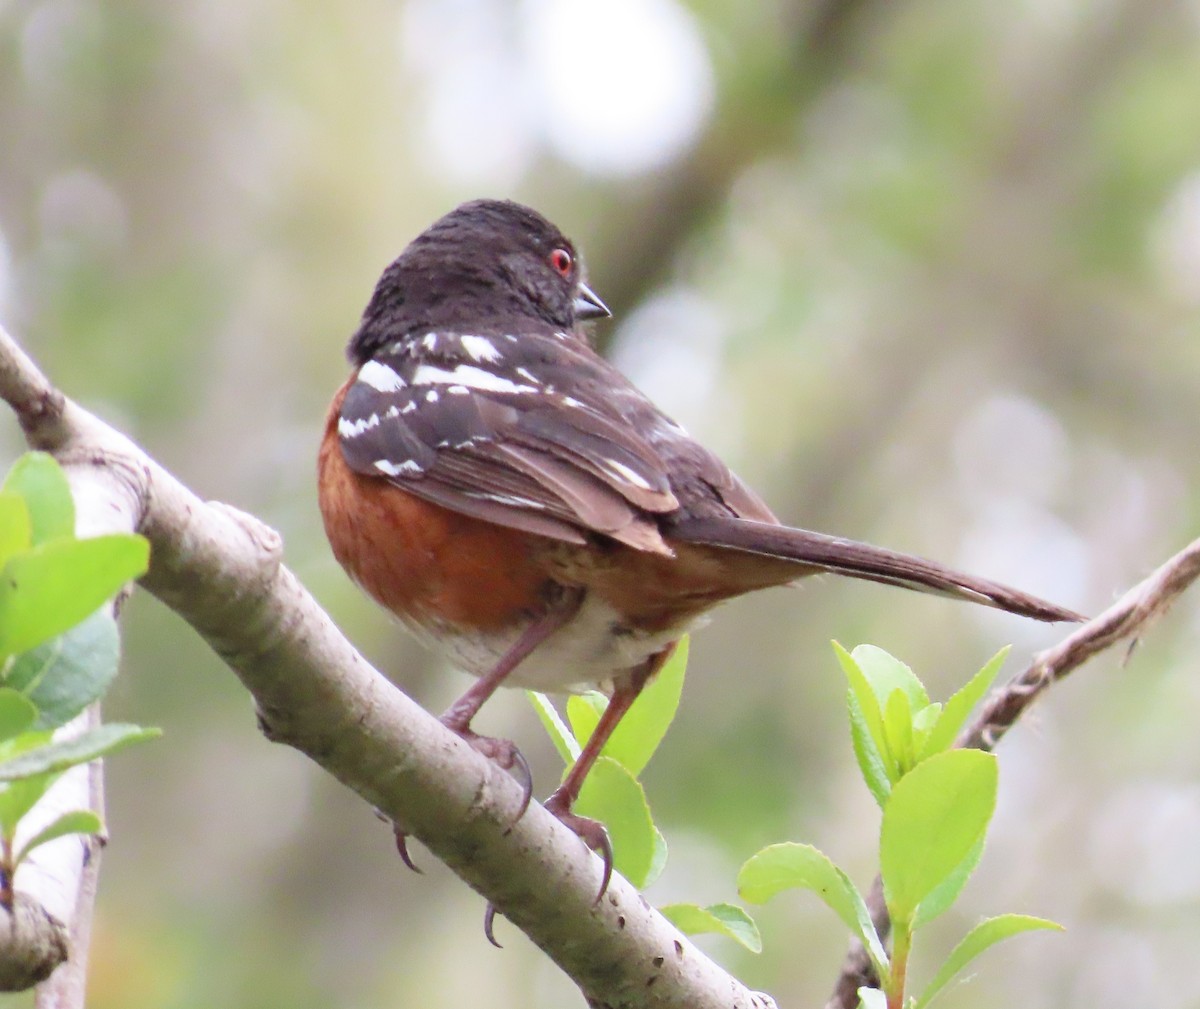 Spotted Towhee - The Spotting Twohees